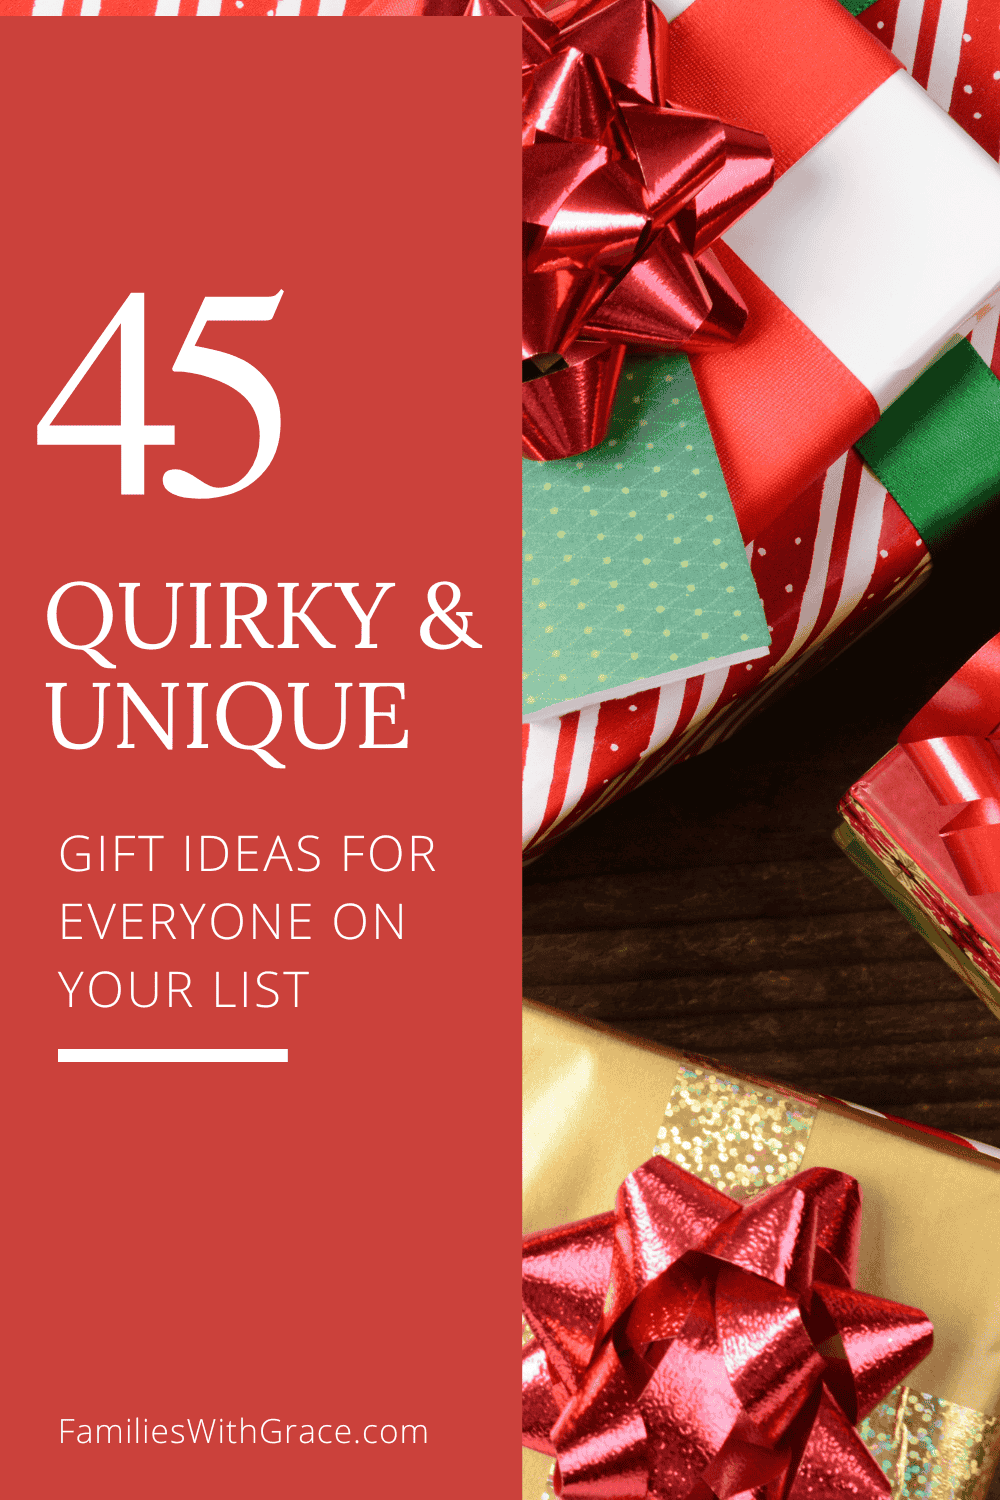 Quirky, fun holiday gift ideas under $25 for everyone on your list